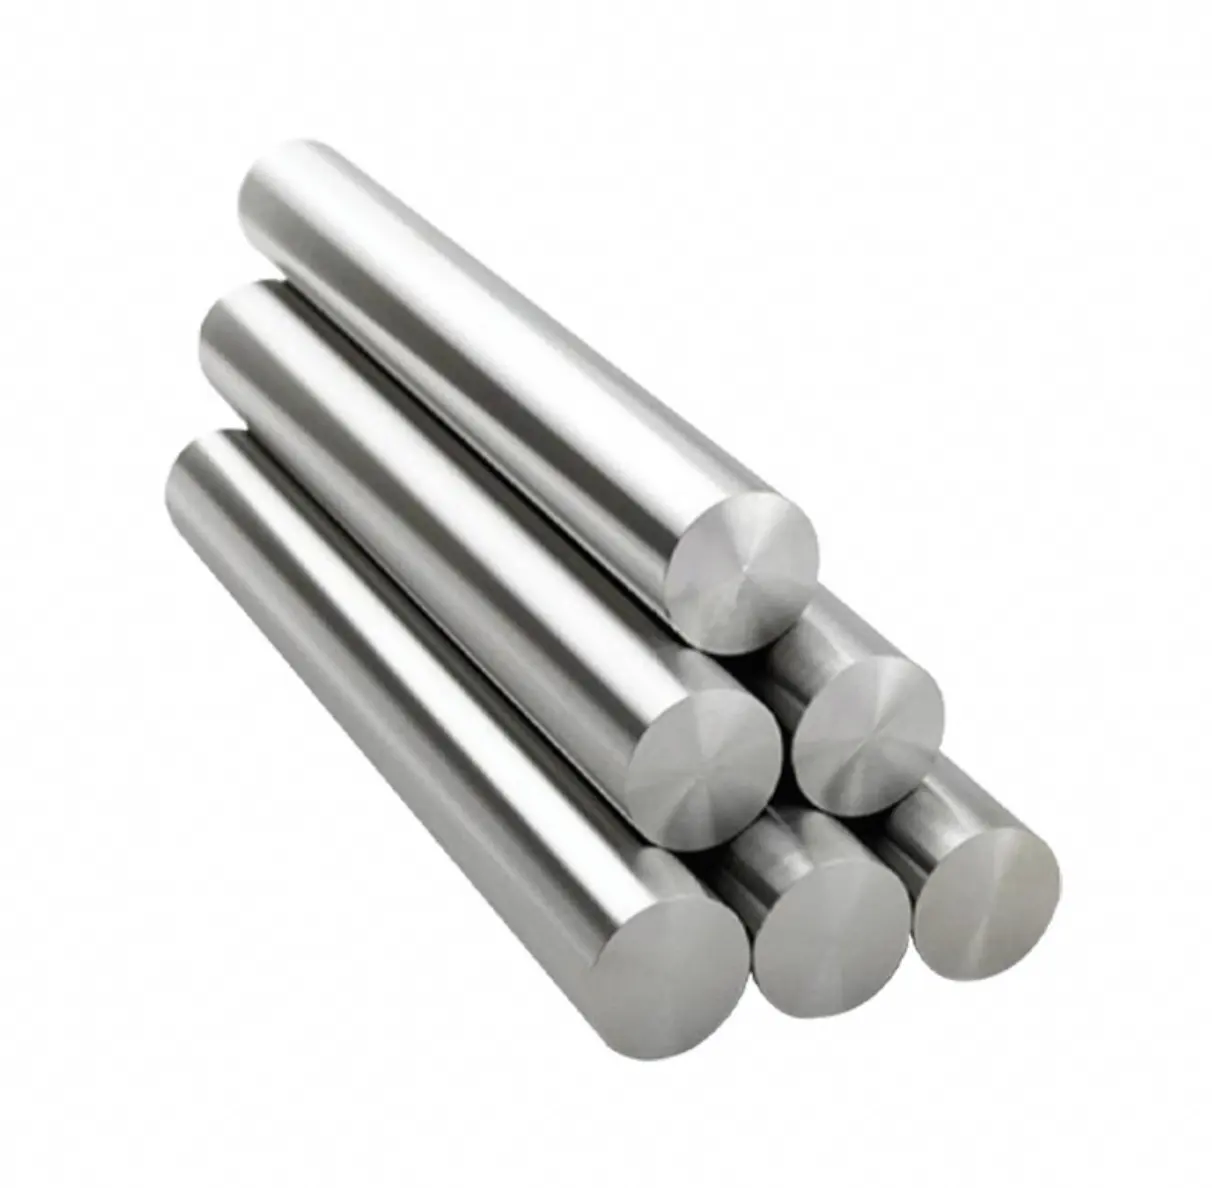 Alloy 6060/6061/7075 Billet Aluminium Bar 8mm-20mm round Rod Cold Drawn Technique for Cutting and Welding